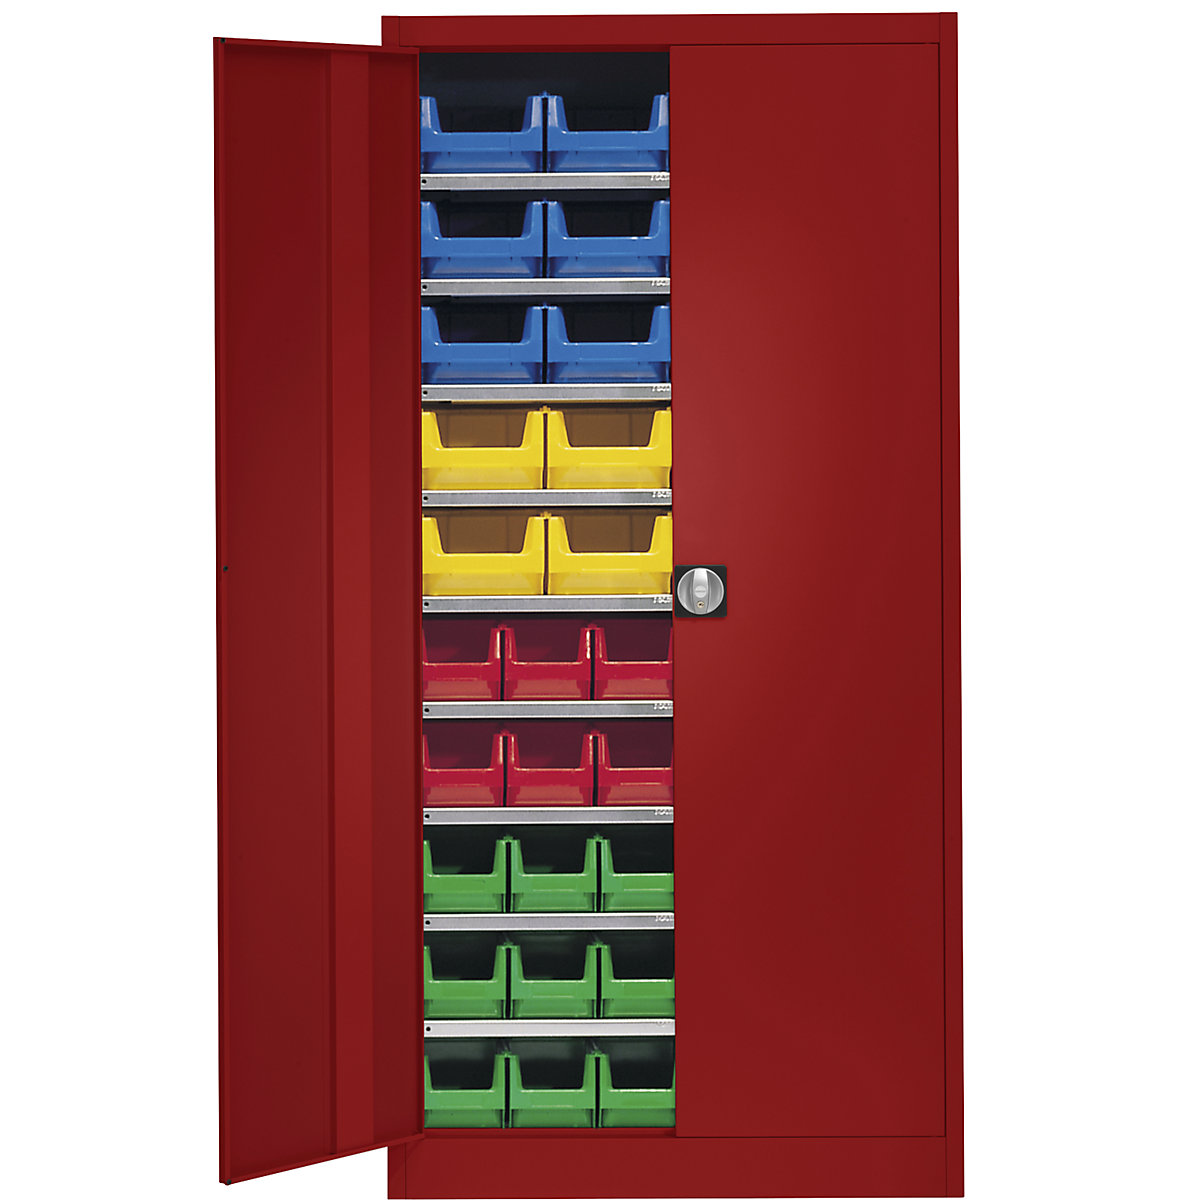 Storage cupboard, single colour – mauser, with 50 open fronted storage bins, 9 shelves, red, 3+ items-4